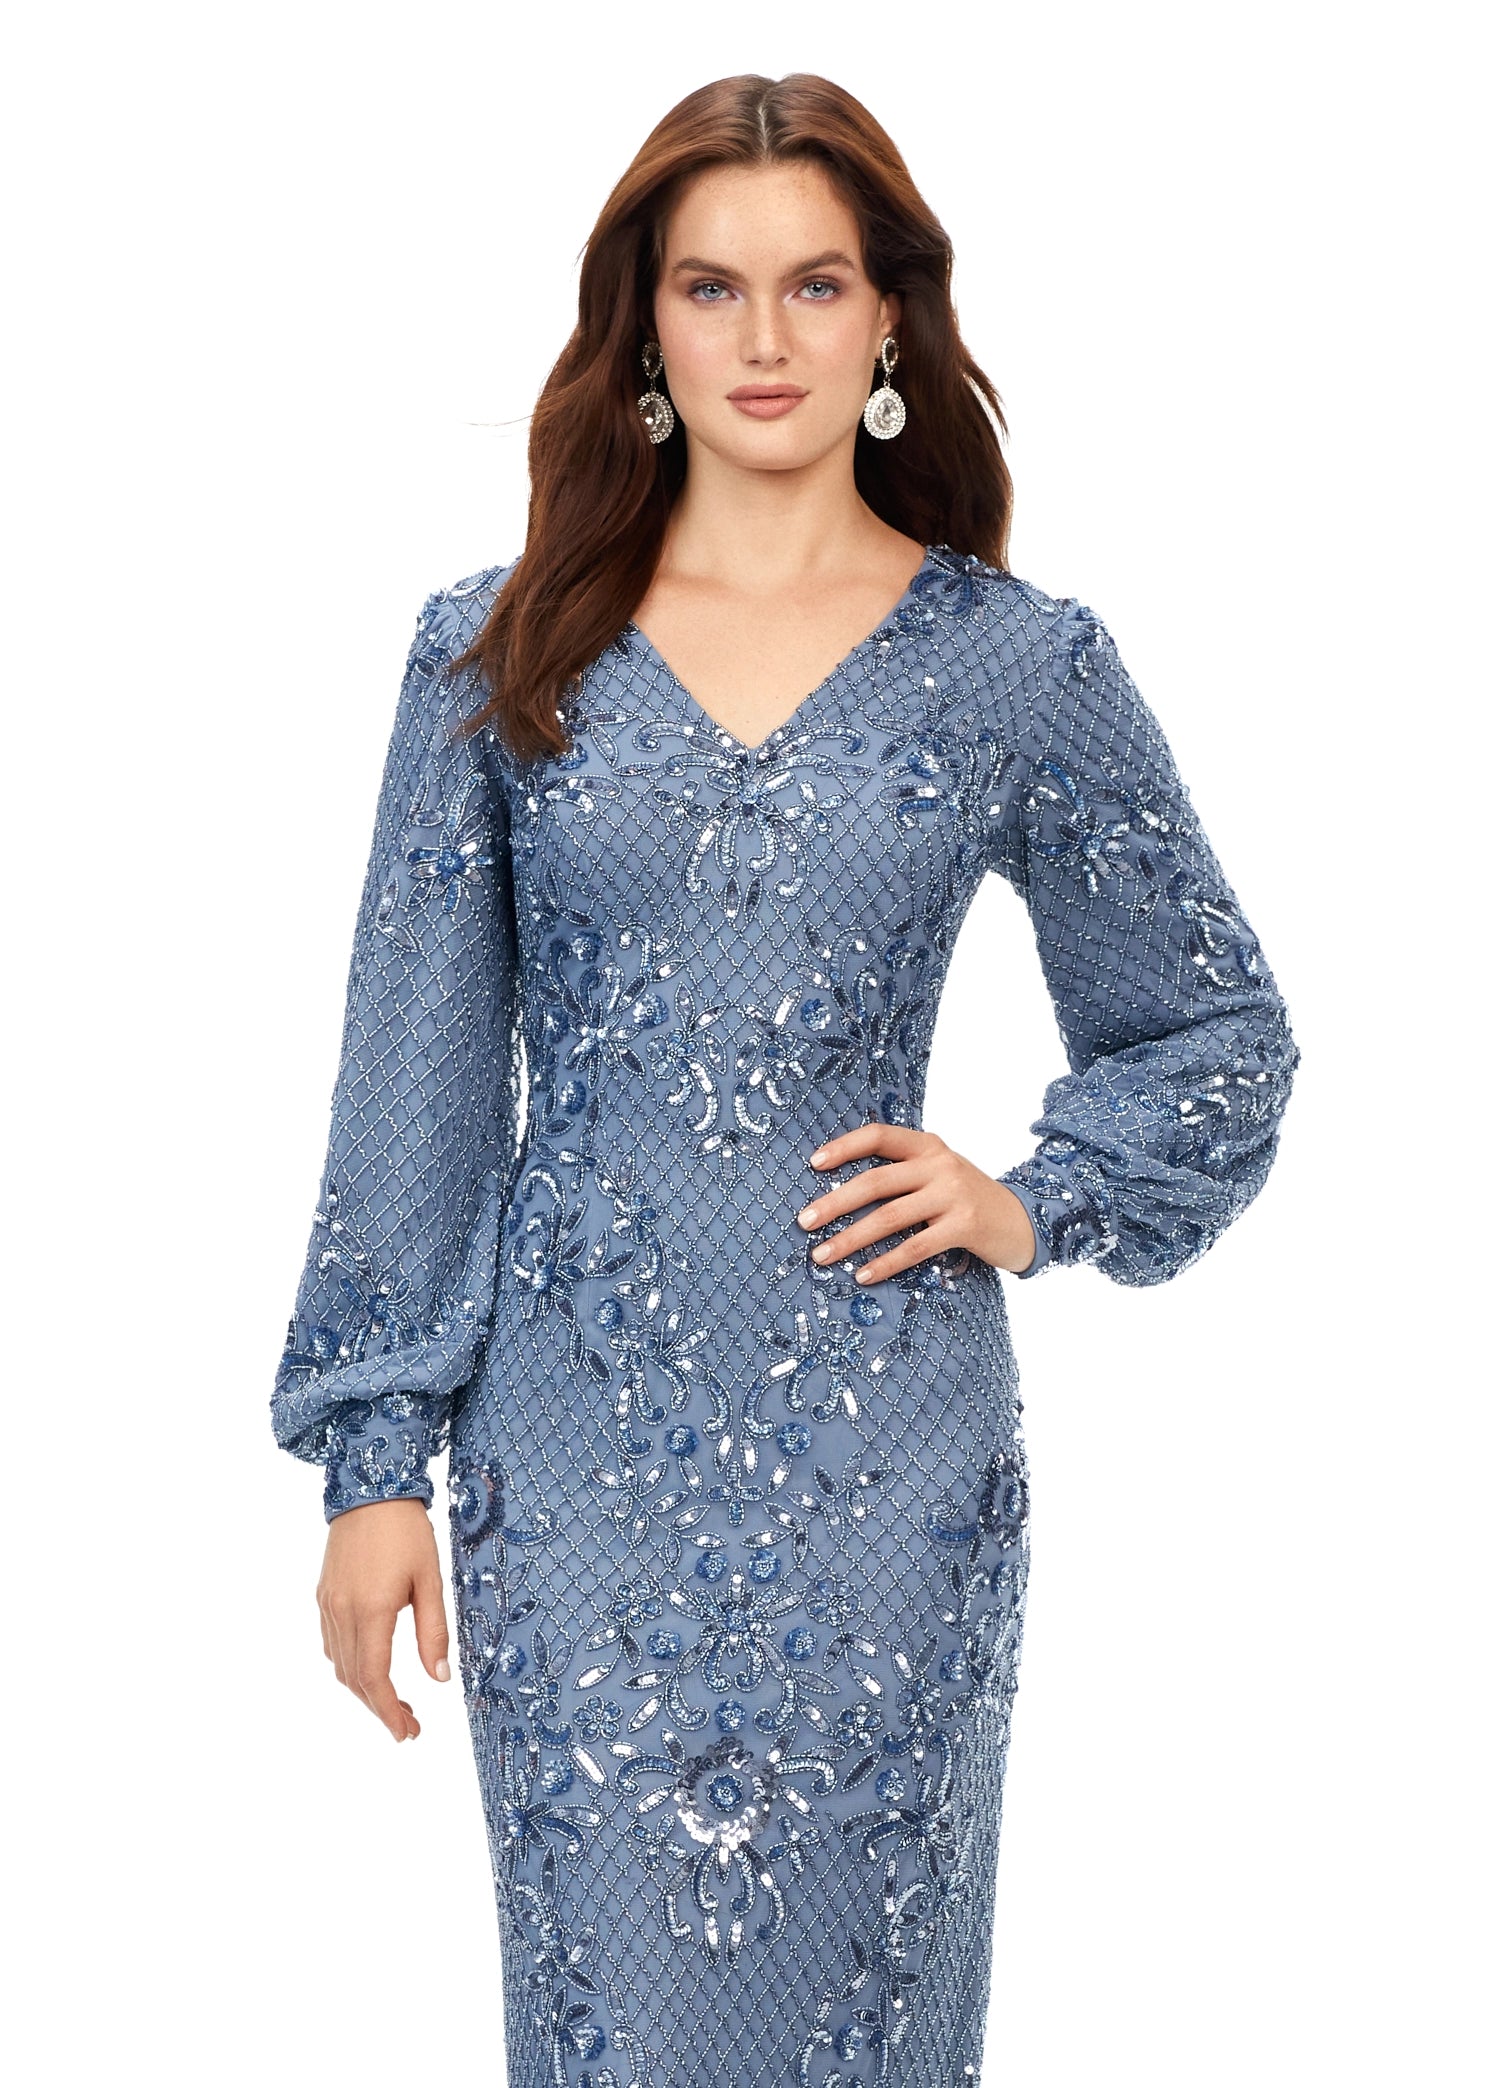 Ashley Lauren 11193 Beaded V-Neck Gown With Bishop Sleeves Fully Sequin Formal Dress. This ultra chic v-neck gown features an ornate bead pattern throughout, and carries onto the bishop sleeves. The full zipper high back, and center back vent completes the look.